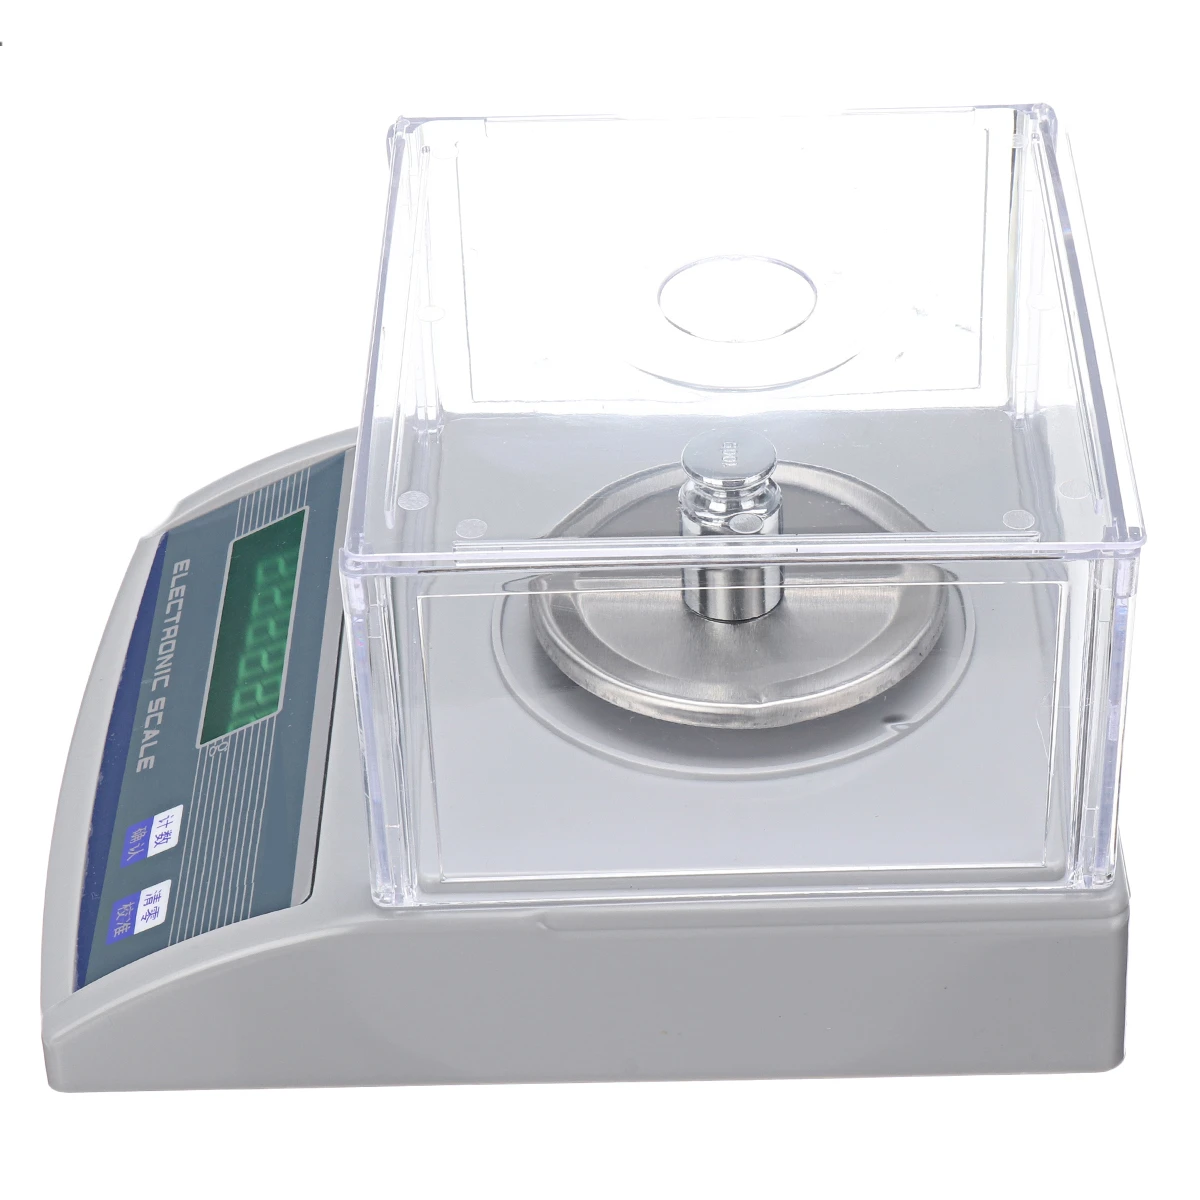 Find 200 x 0 001 g 1mg Lab Precision Scale LCD Digital Electronic Scale Balance For Jewelry Kitchen Food Weight for Sale on Gipsybee.com